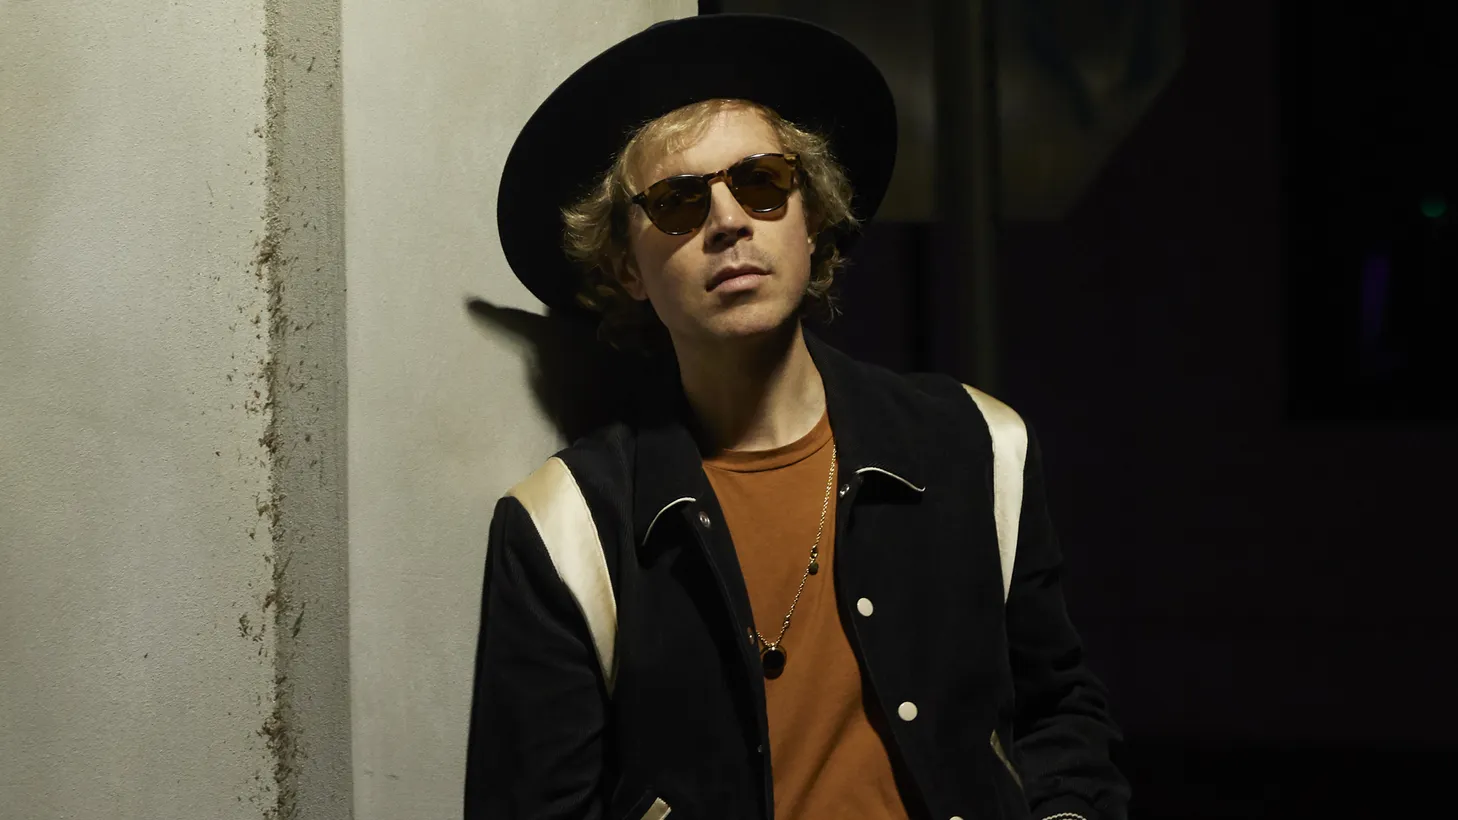 Beck's fourteenth studio album Hyperspace is his most collaborative to date. The bulk of the album was co-written and co-produced by Pharrell and contains a spacious quality that plays to the strength of their artistic relationship.